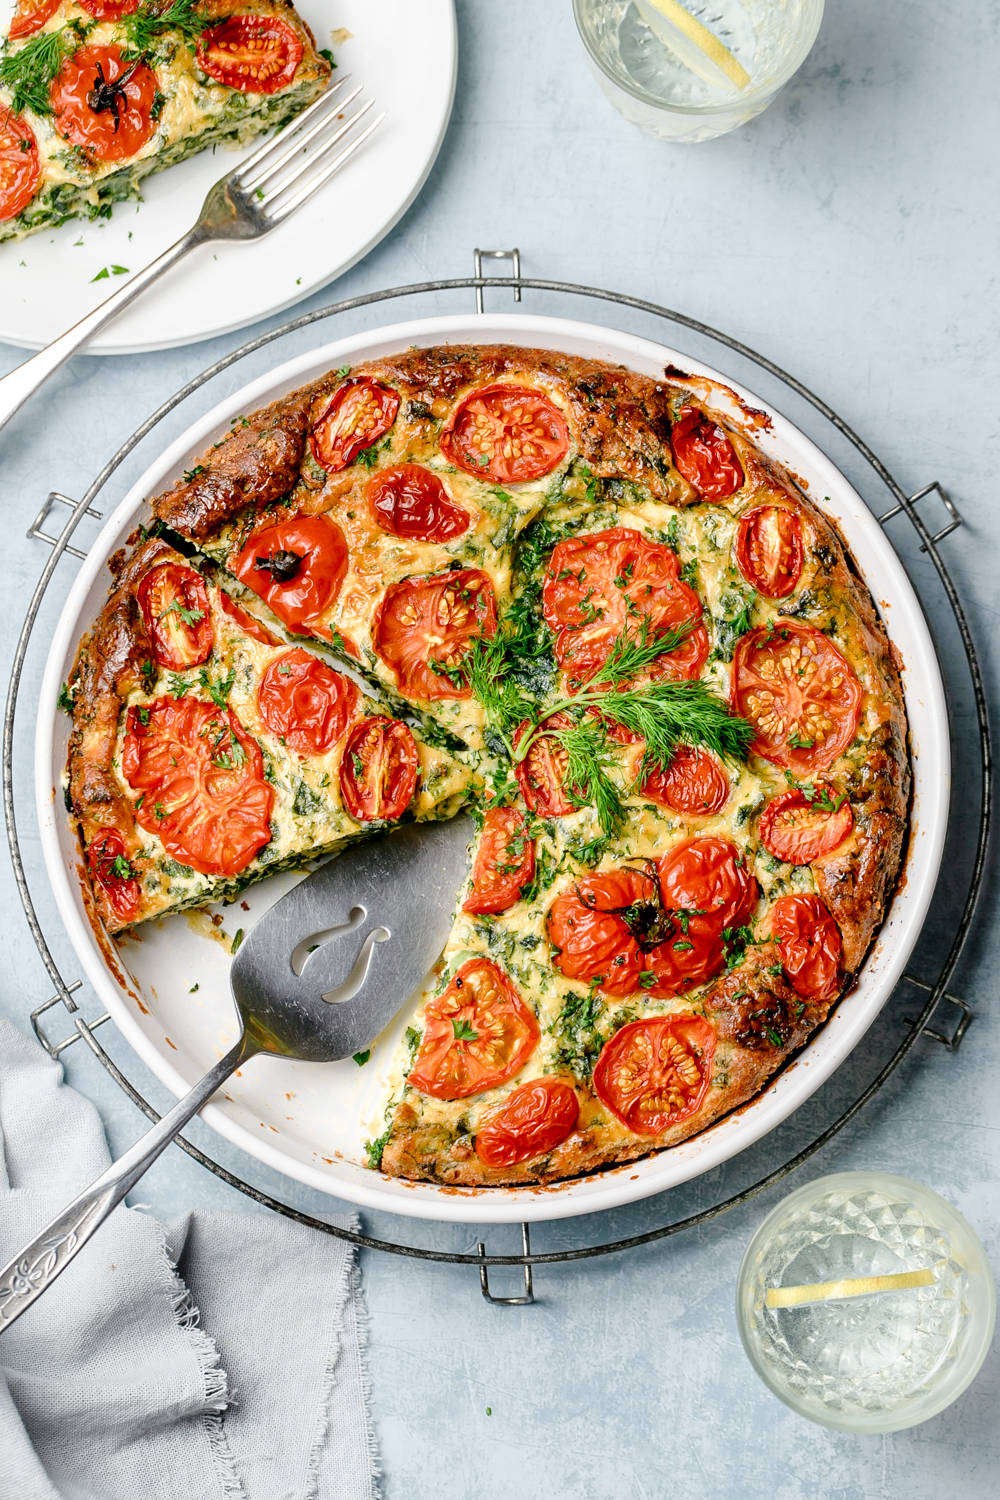 Kale, Dill and Ricotta Crustless Pie - Nourish Every Day